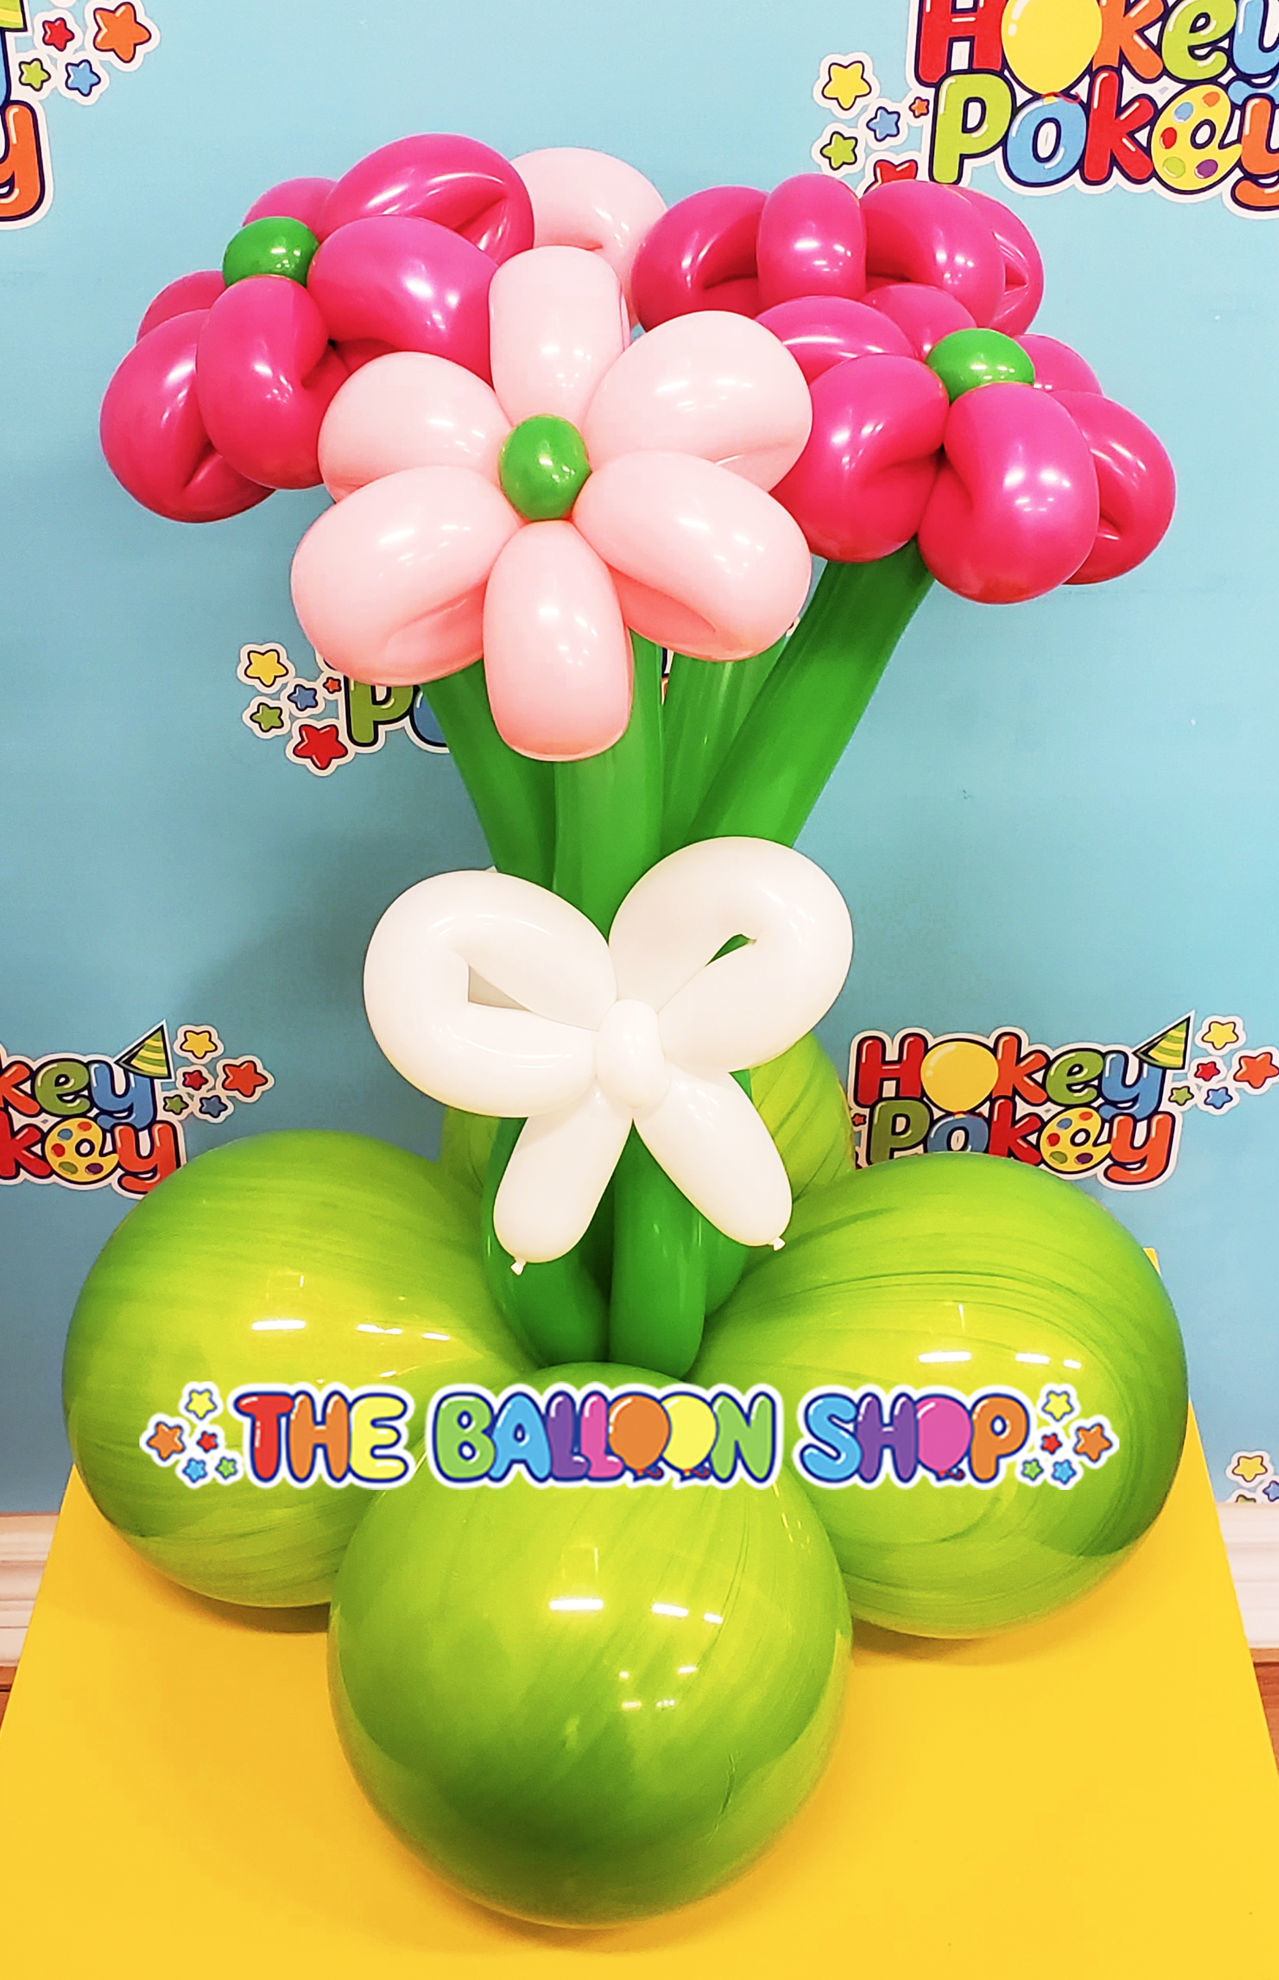 Picture of 5 Flowers Balloon Bouquet with a Bow - Balloon Centerpiece